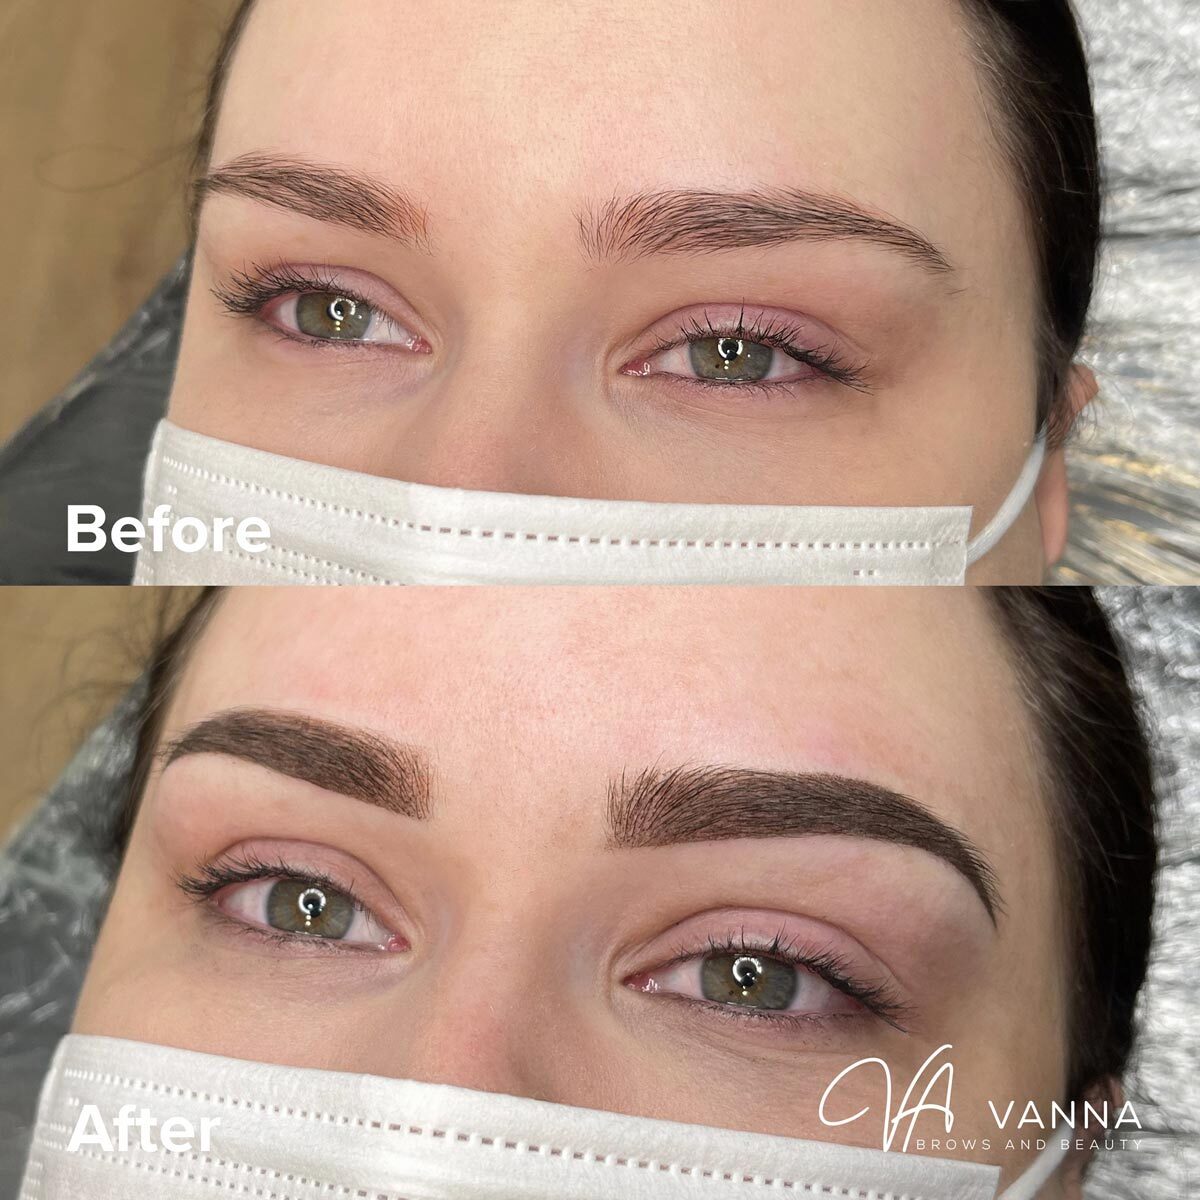 ﻿Why Vanna's Ombré Powder Brows is the Best Brow Decision You'll Ever Make?